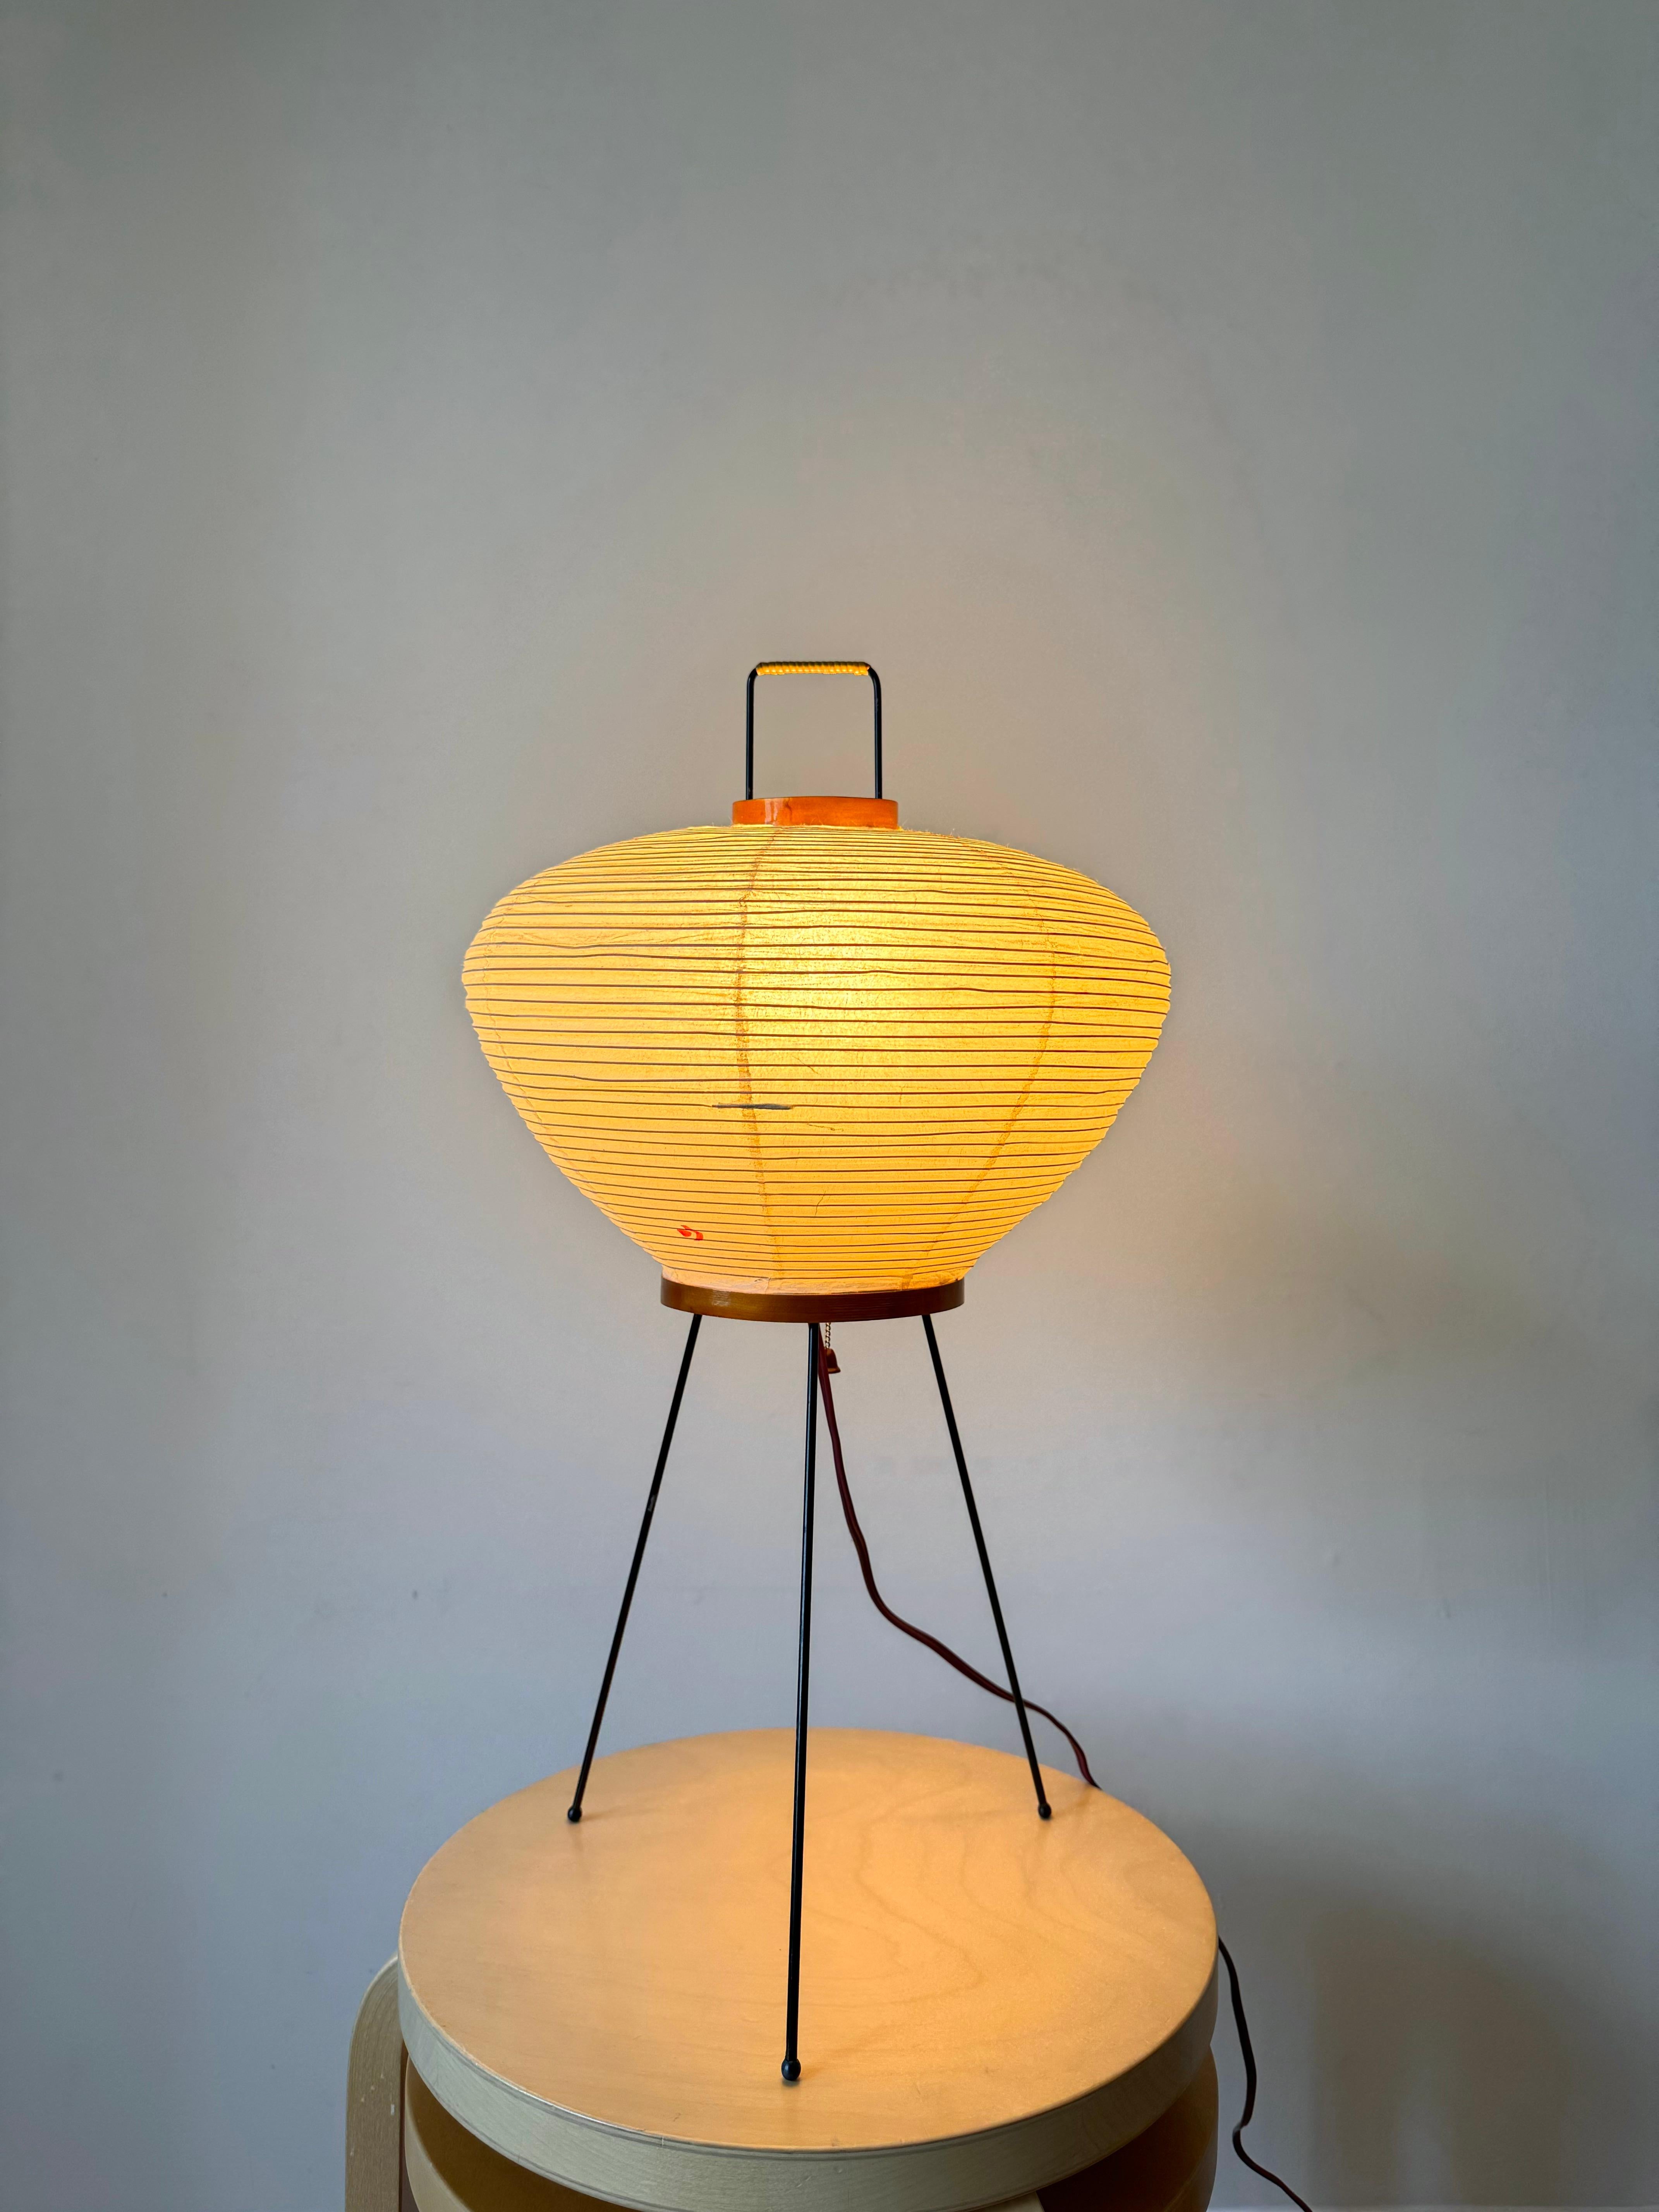 Akari Light Sculptures by Isamu Noguchi are considered icons of 1950s modern design. Designed by Noguchi beginning in 1951 and handmade for a half century by the original manufacturer in Gifu, Japan, the paper lanterns are a harmonious blend of